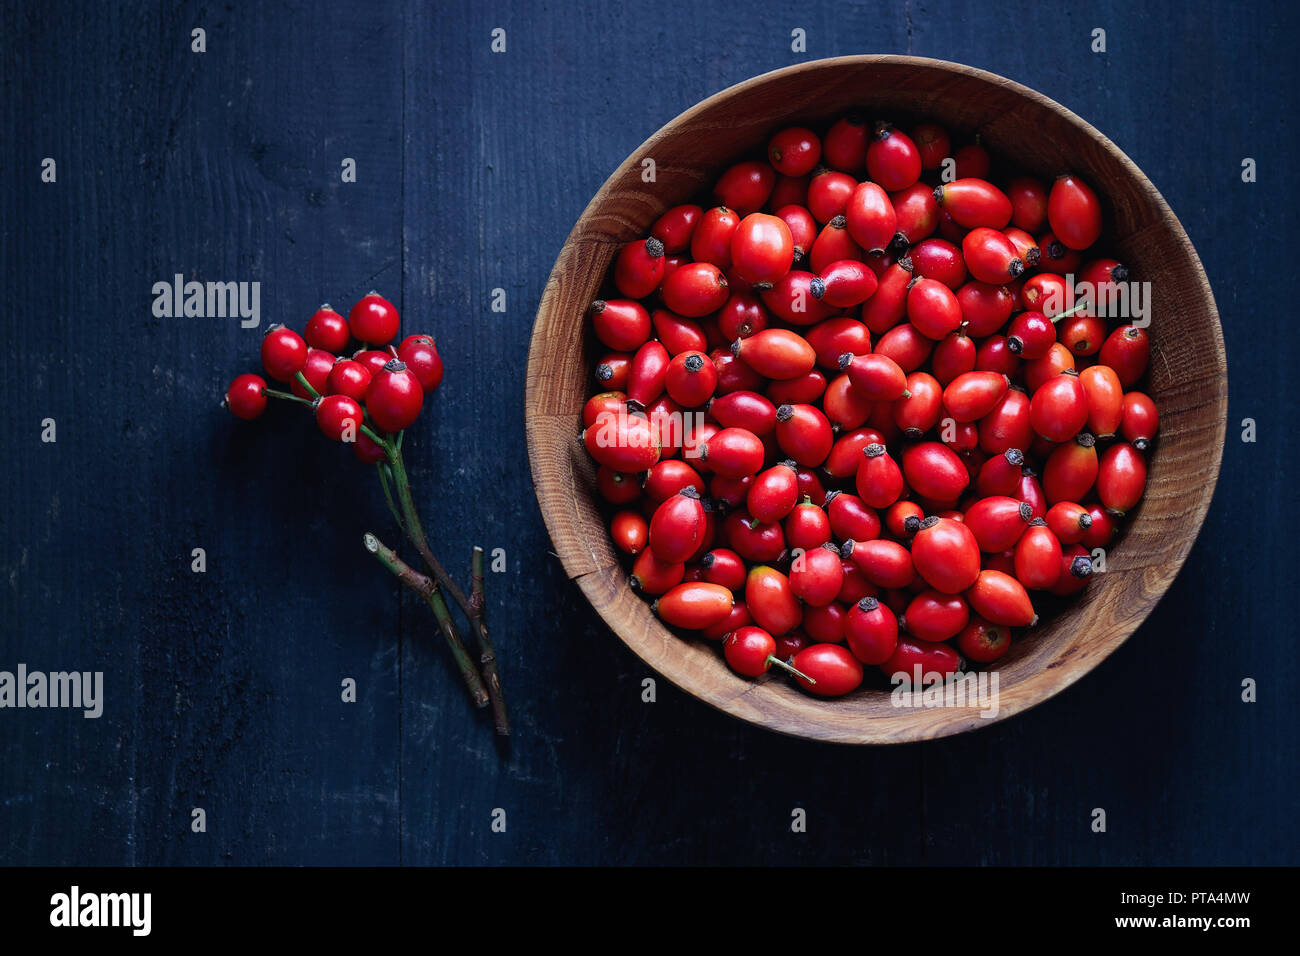 Freshly picked rose hips. Wooden bowl of rose hip or rosehip, commonly known as the dog rose (Rosa canina). Stock Photo